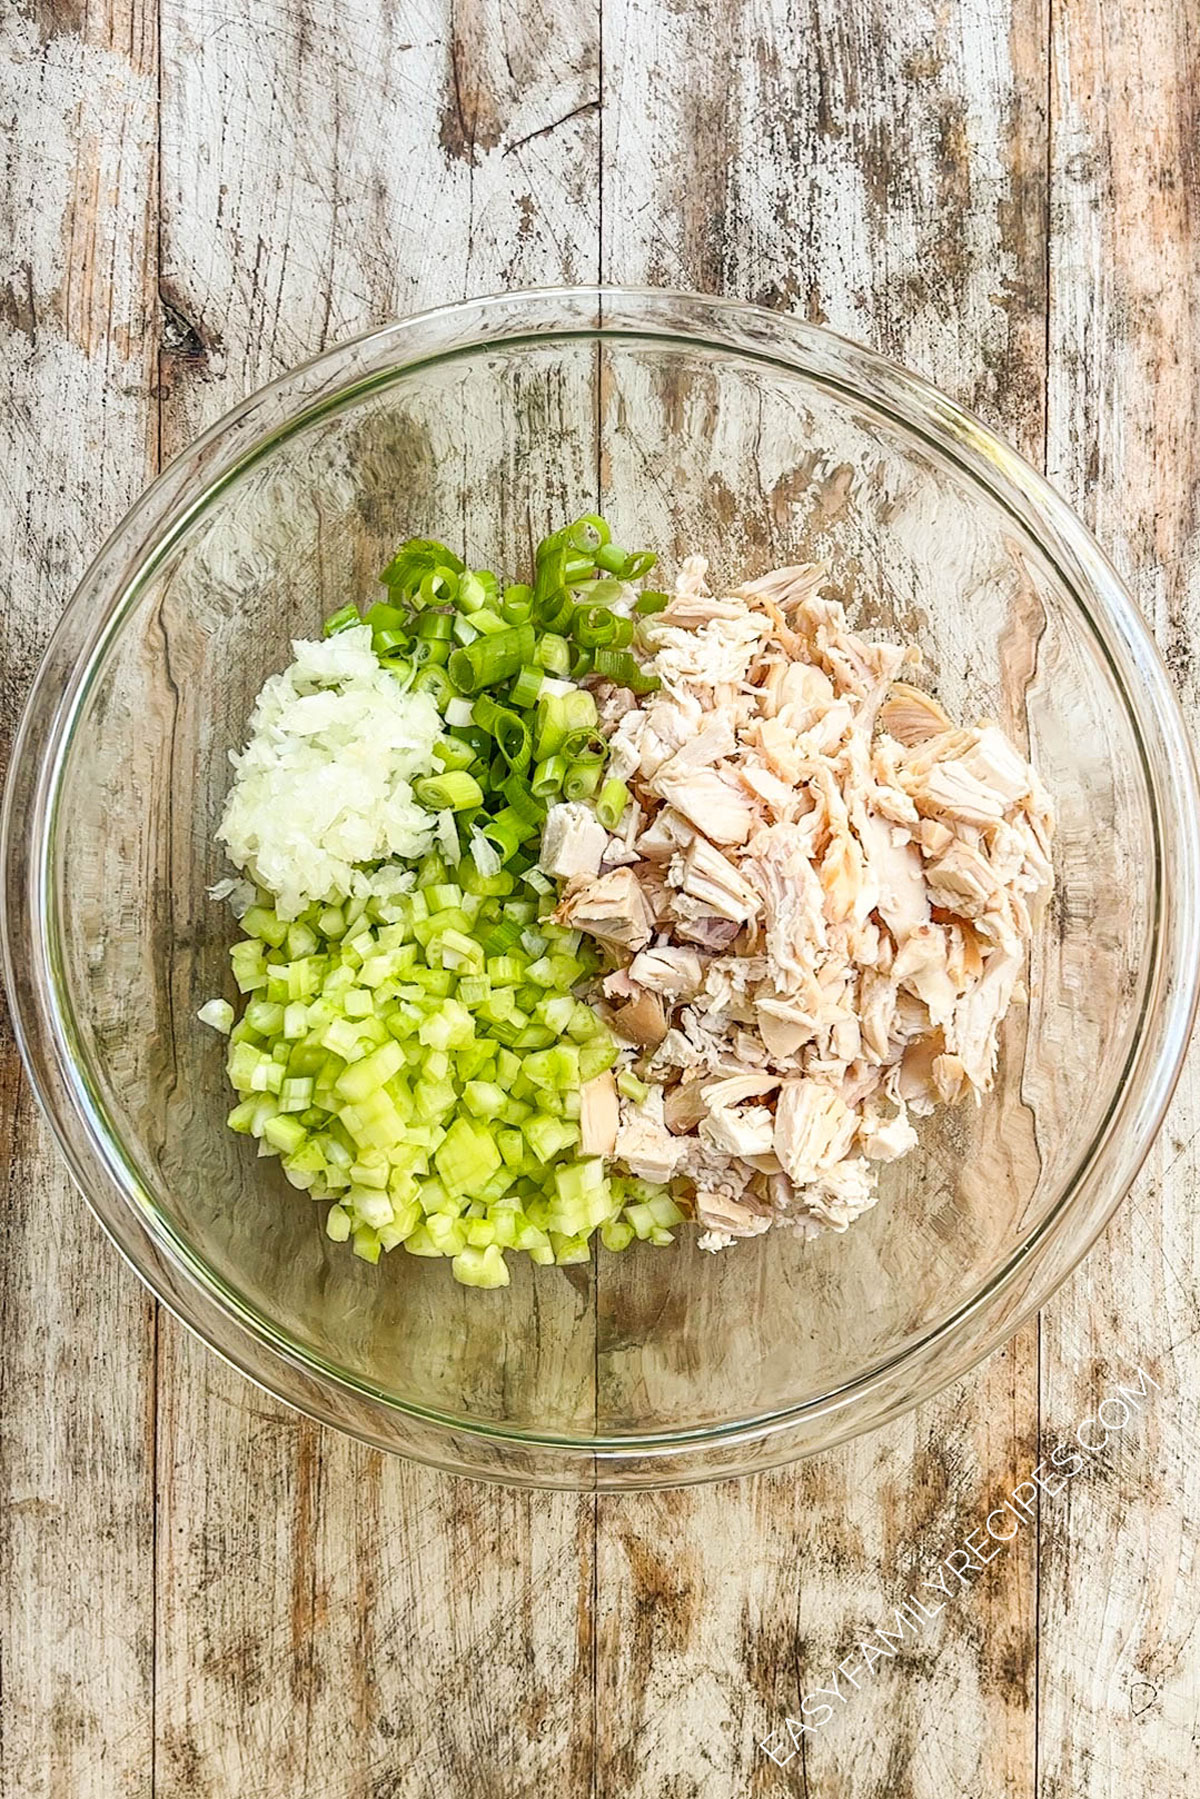 Ingredients for buffalo chicken salad in a glass bowl.